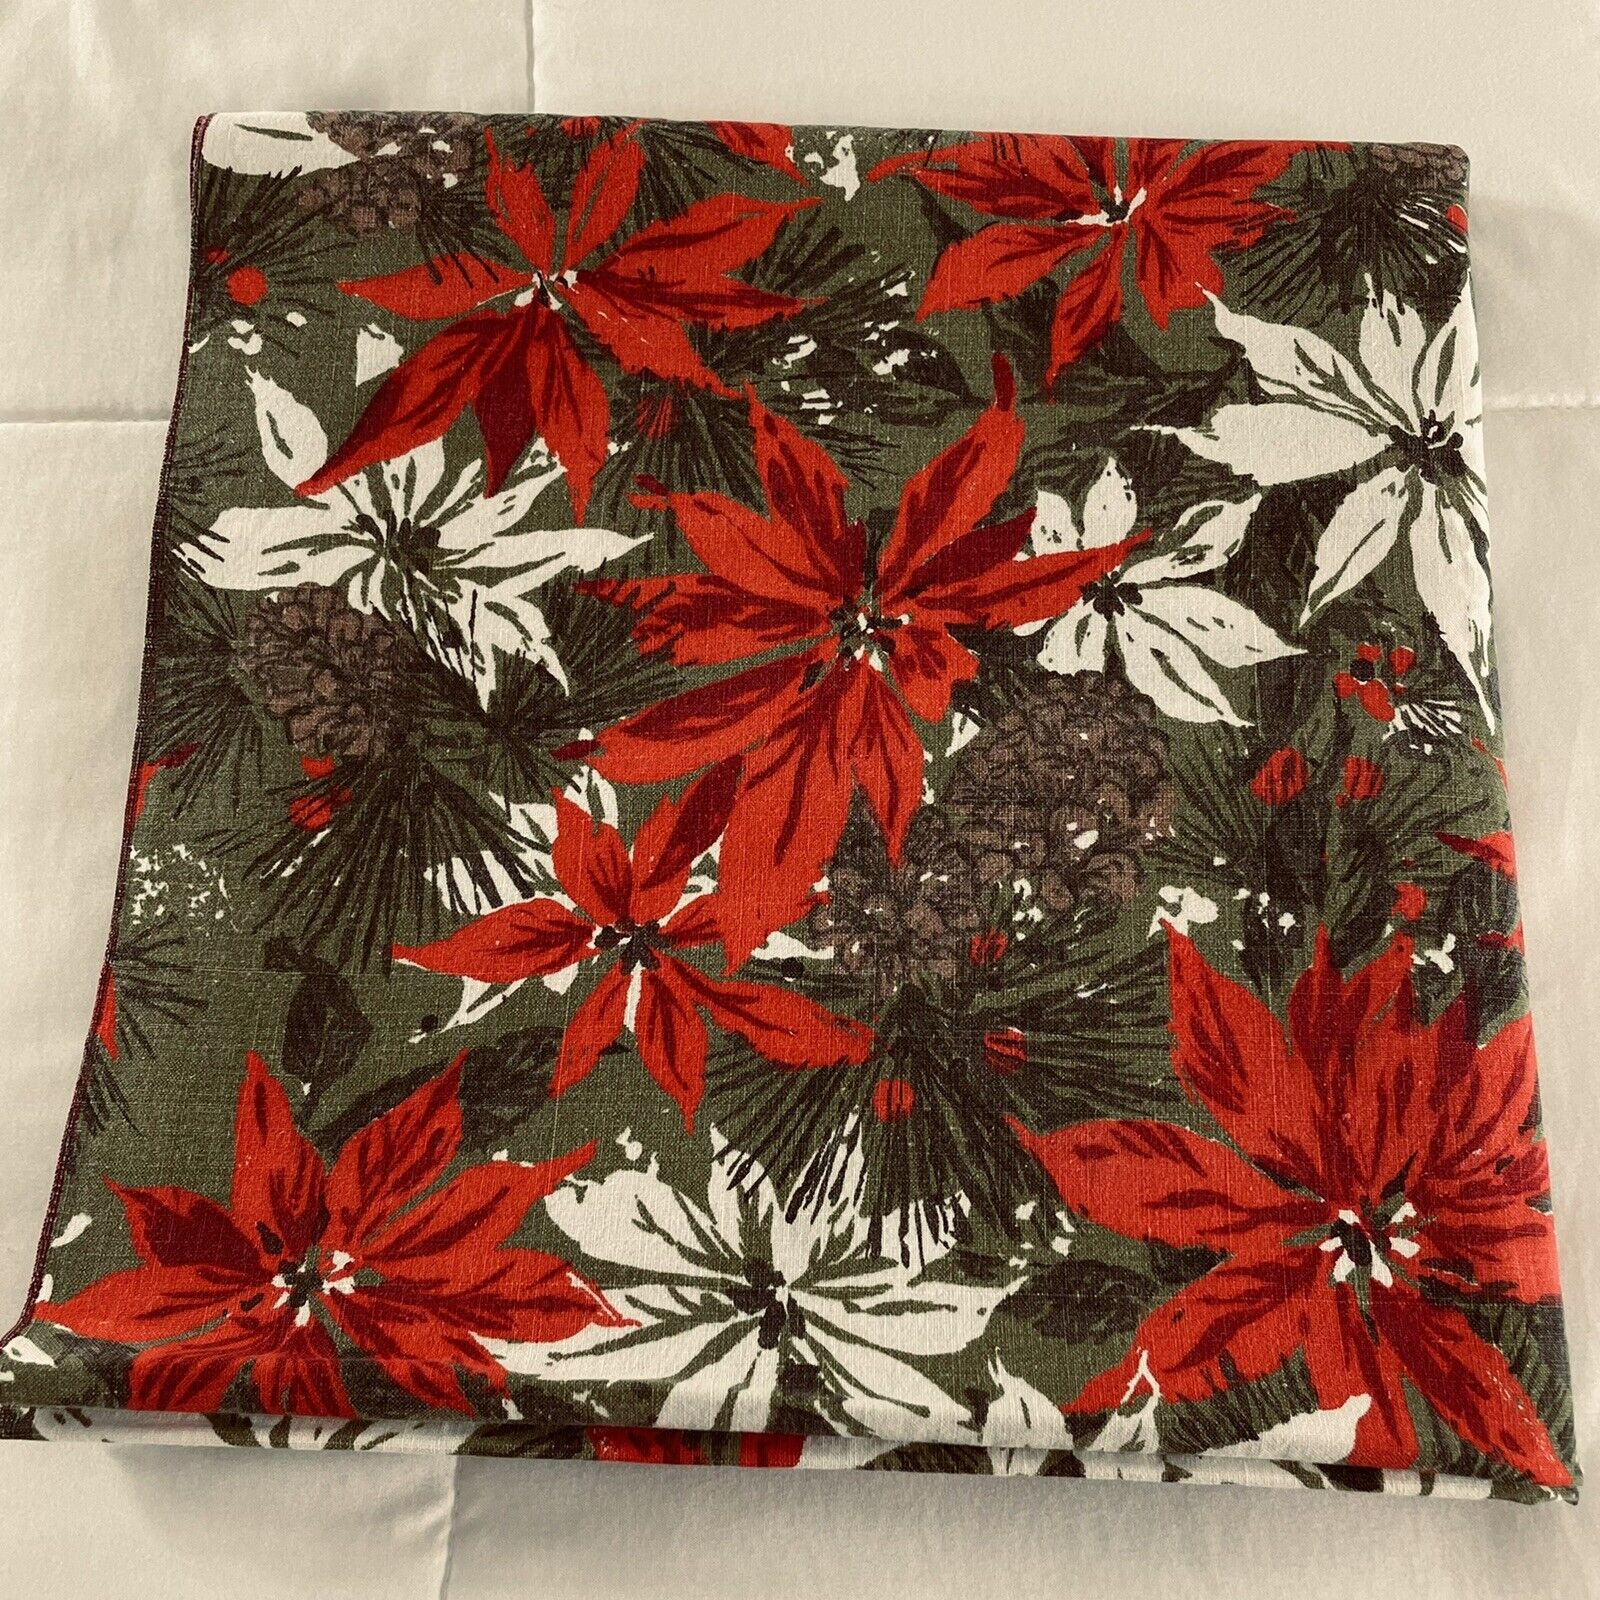 Vtg Christmas Tablecloth Poinsettia Pinecone Red Green 51x51 Square Handmade